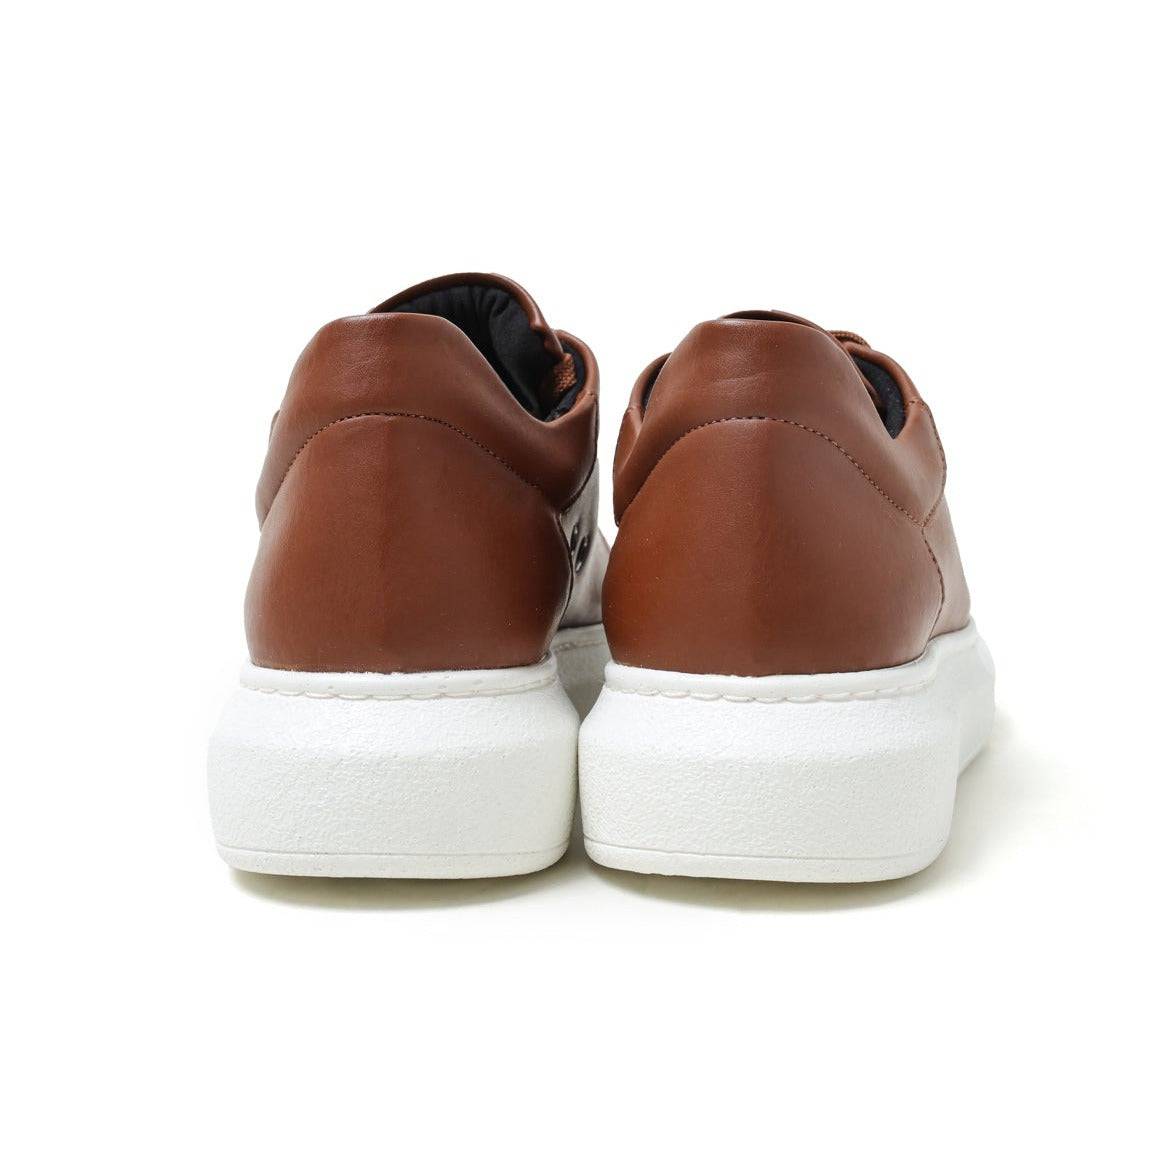 Low Top Casual Platform Sneakers for Women by Apollo Moda | Pluto Rich Brown